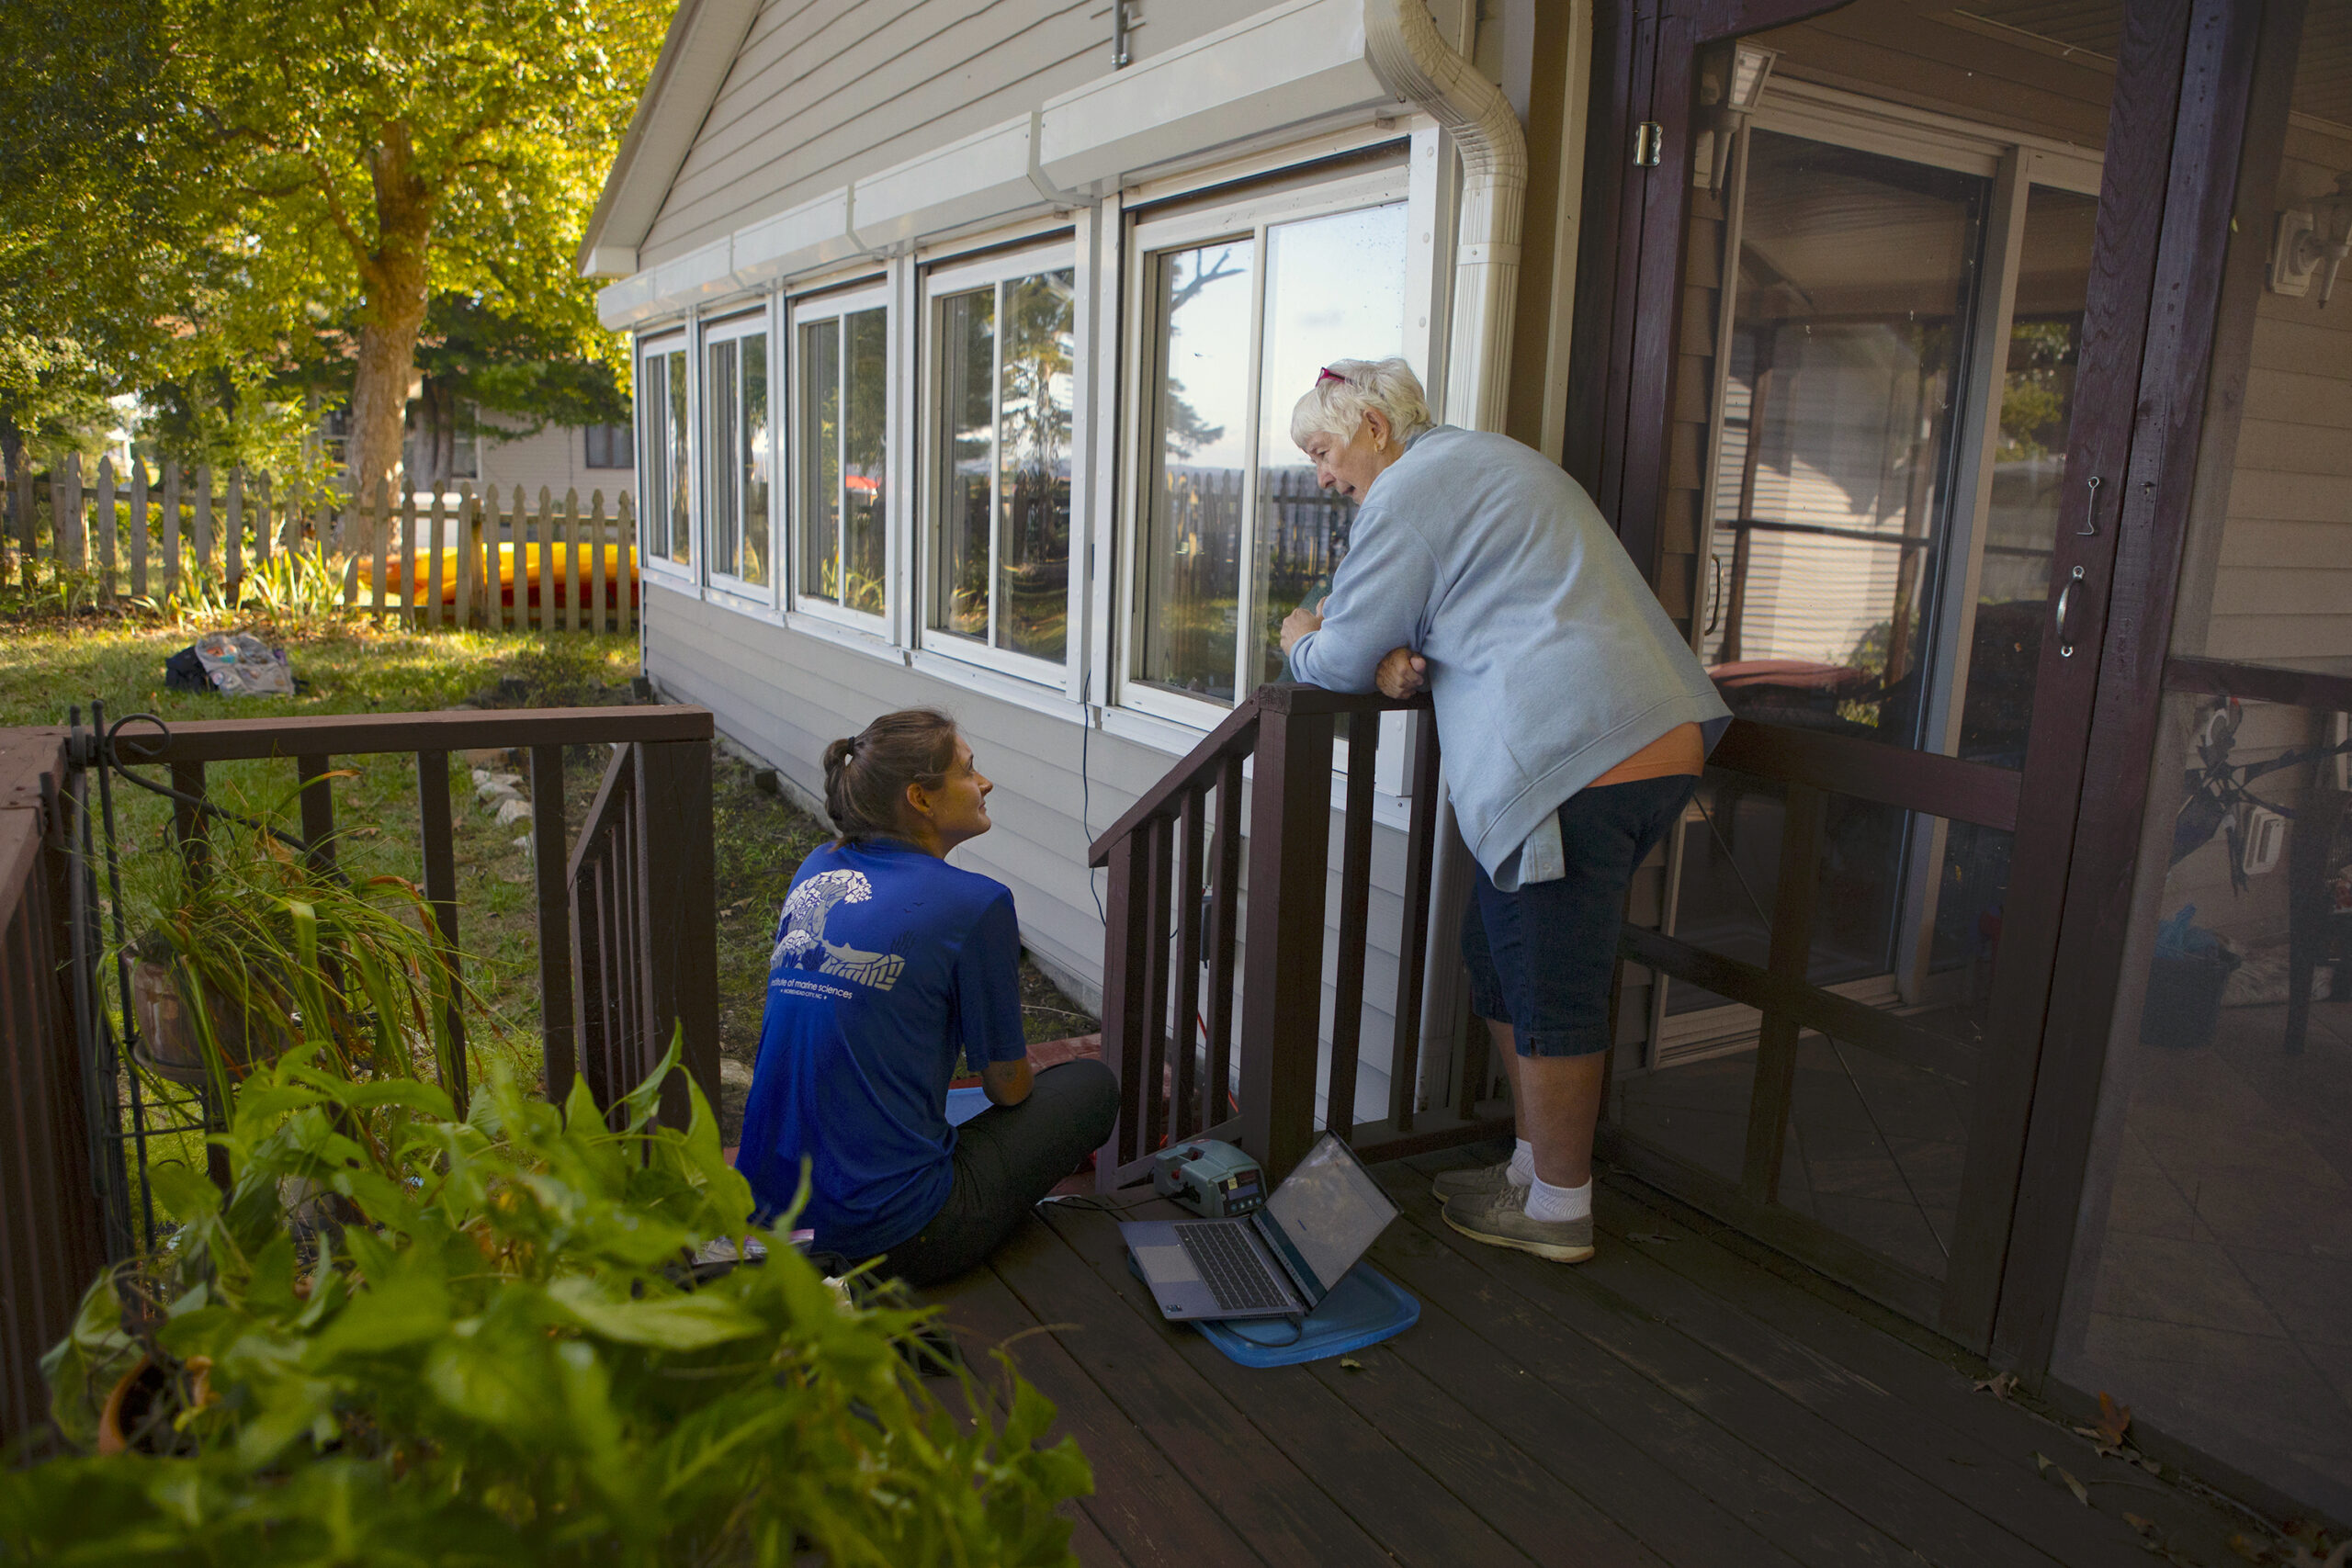 Local community member leans over the deck balcony while talking to a researcher, seated below.